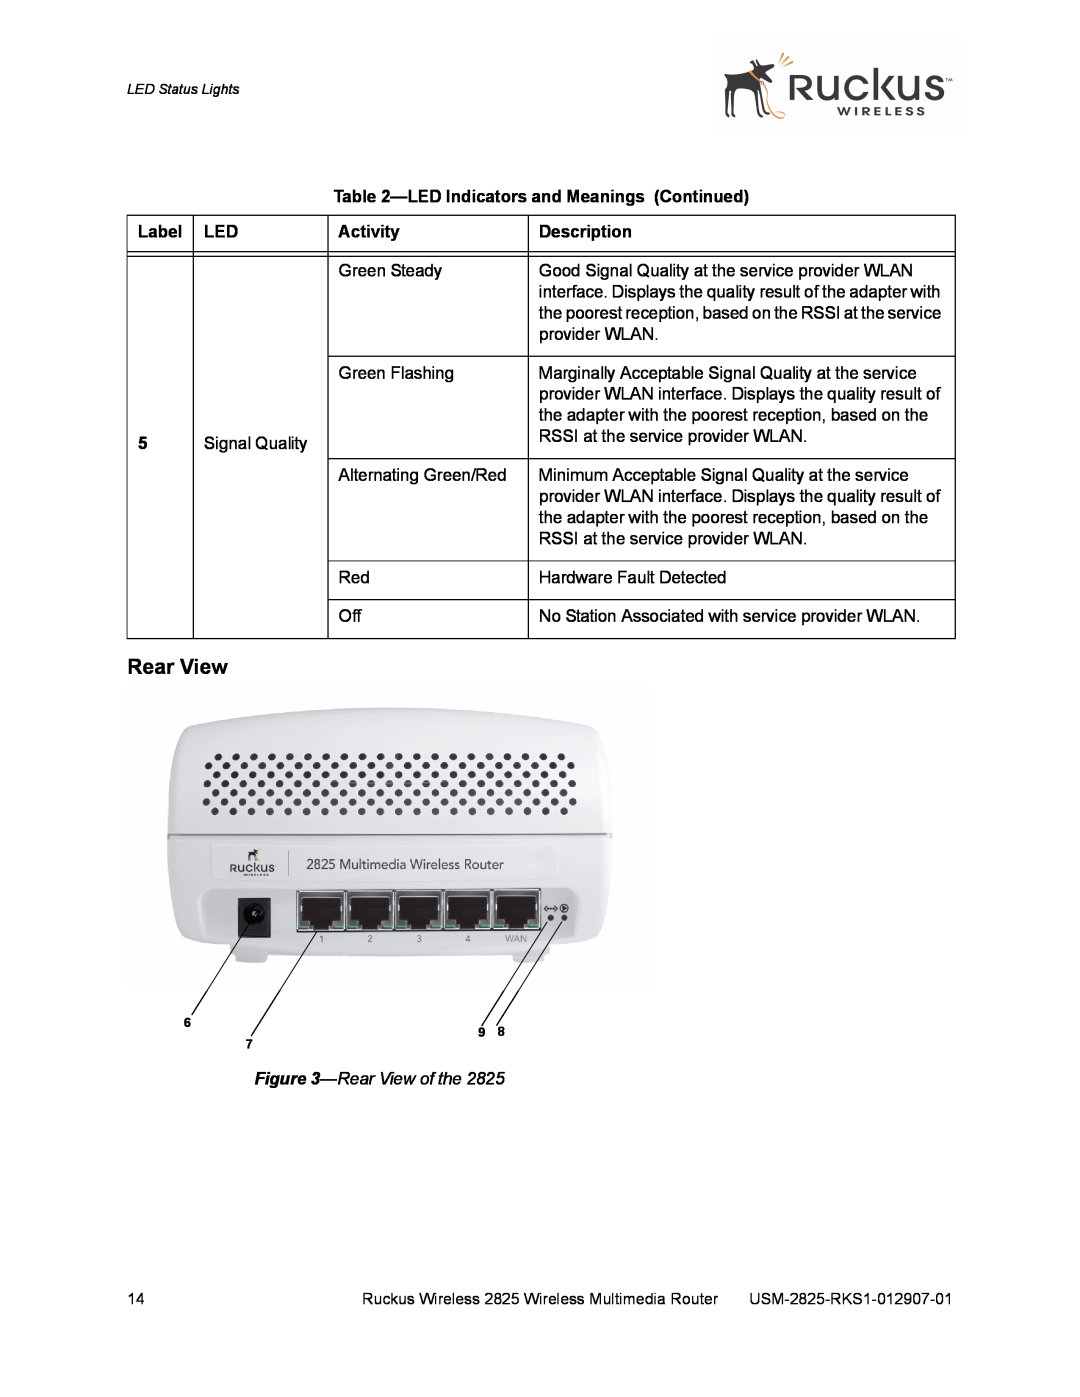 Ruckus Wireless 2825, 2111 manual Rear View, LED Indicators and Meanings Continued, Label, Activity, Description 